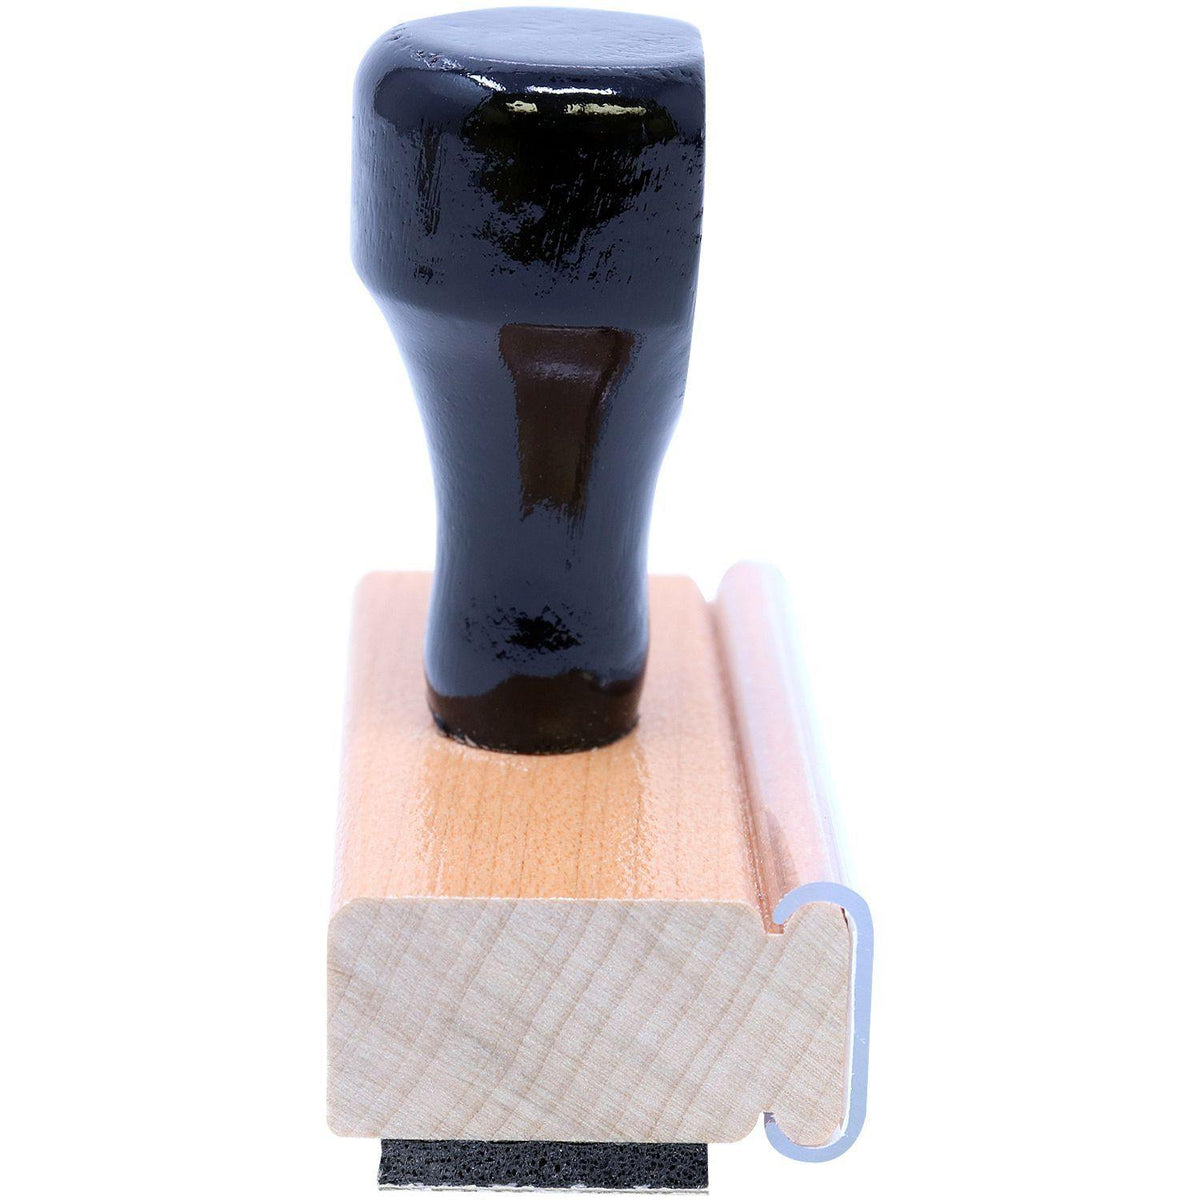 Narrow Font Insurance Verified Rubber Stamp - Engineer Seal Stamps - Brand_Acorn, Impression Size_Small, Stamp Type_Regular Stamp, Type of Use_Finance